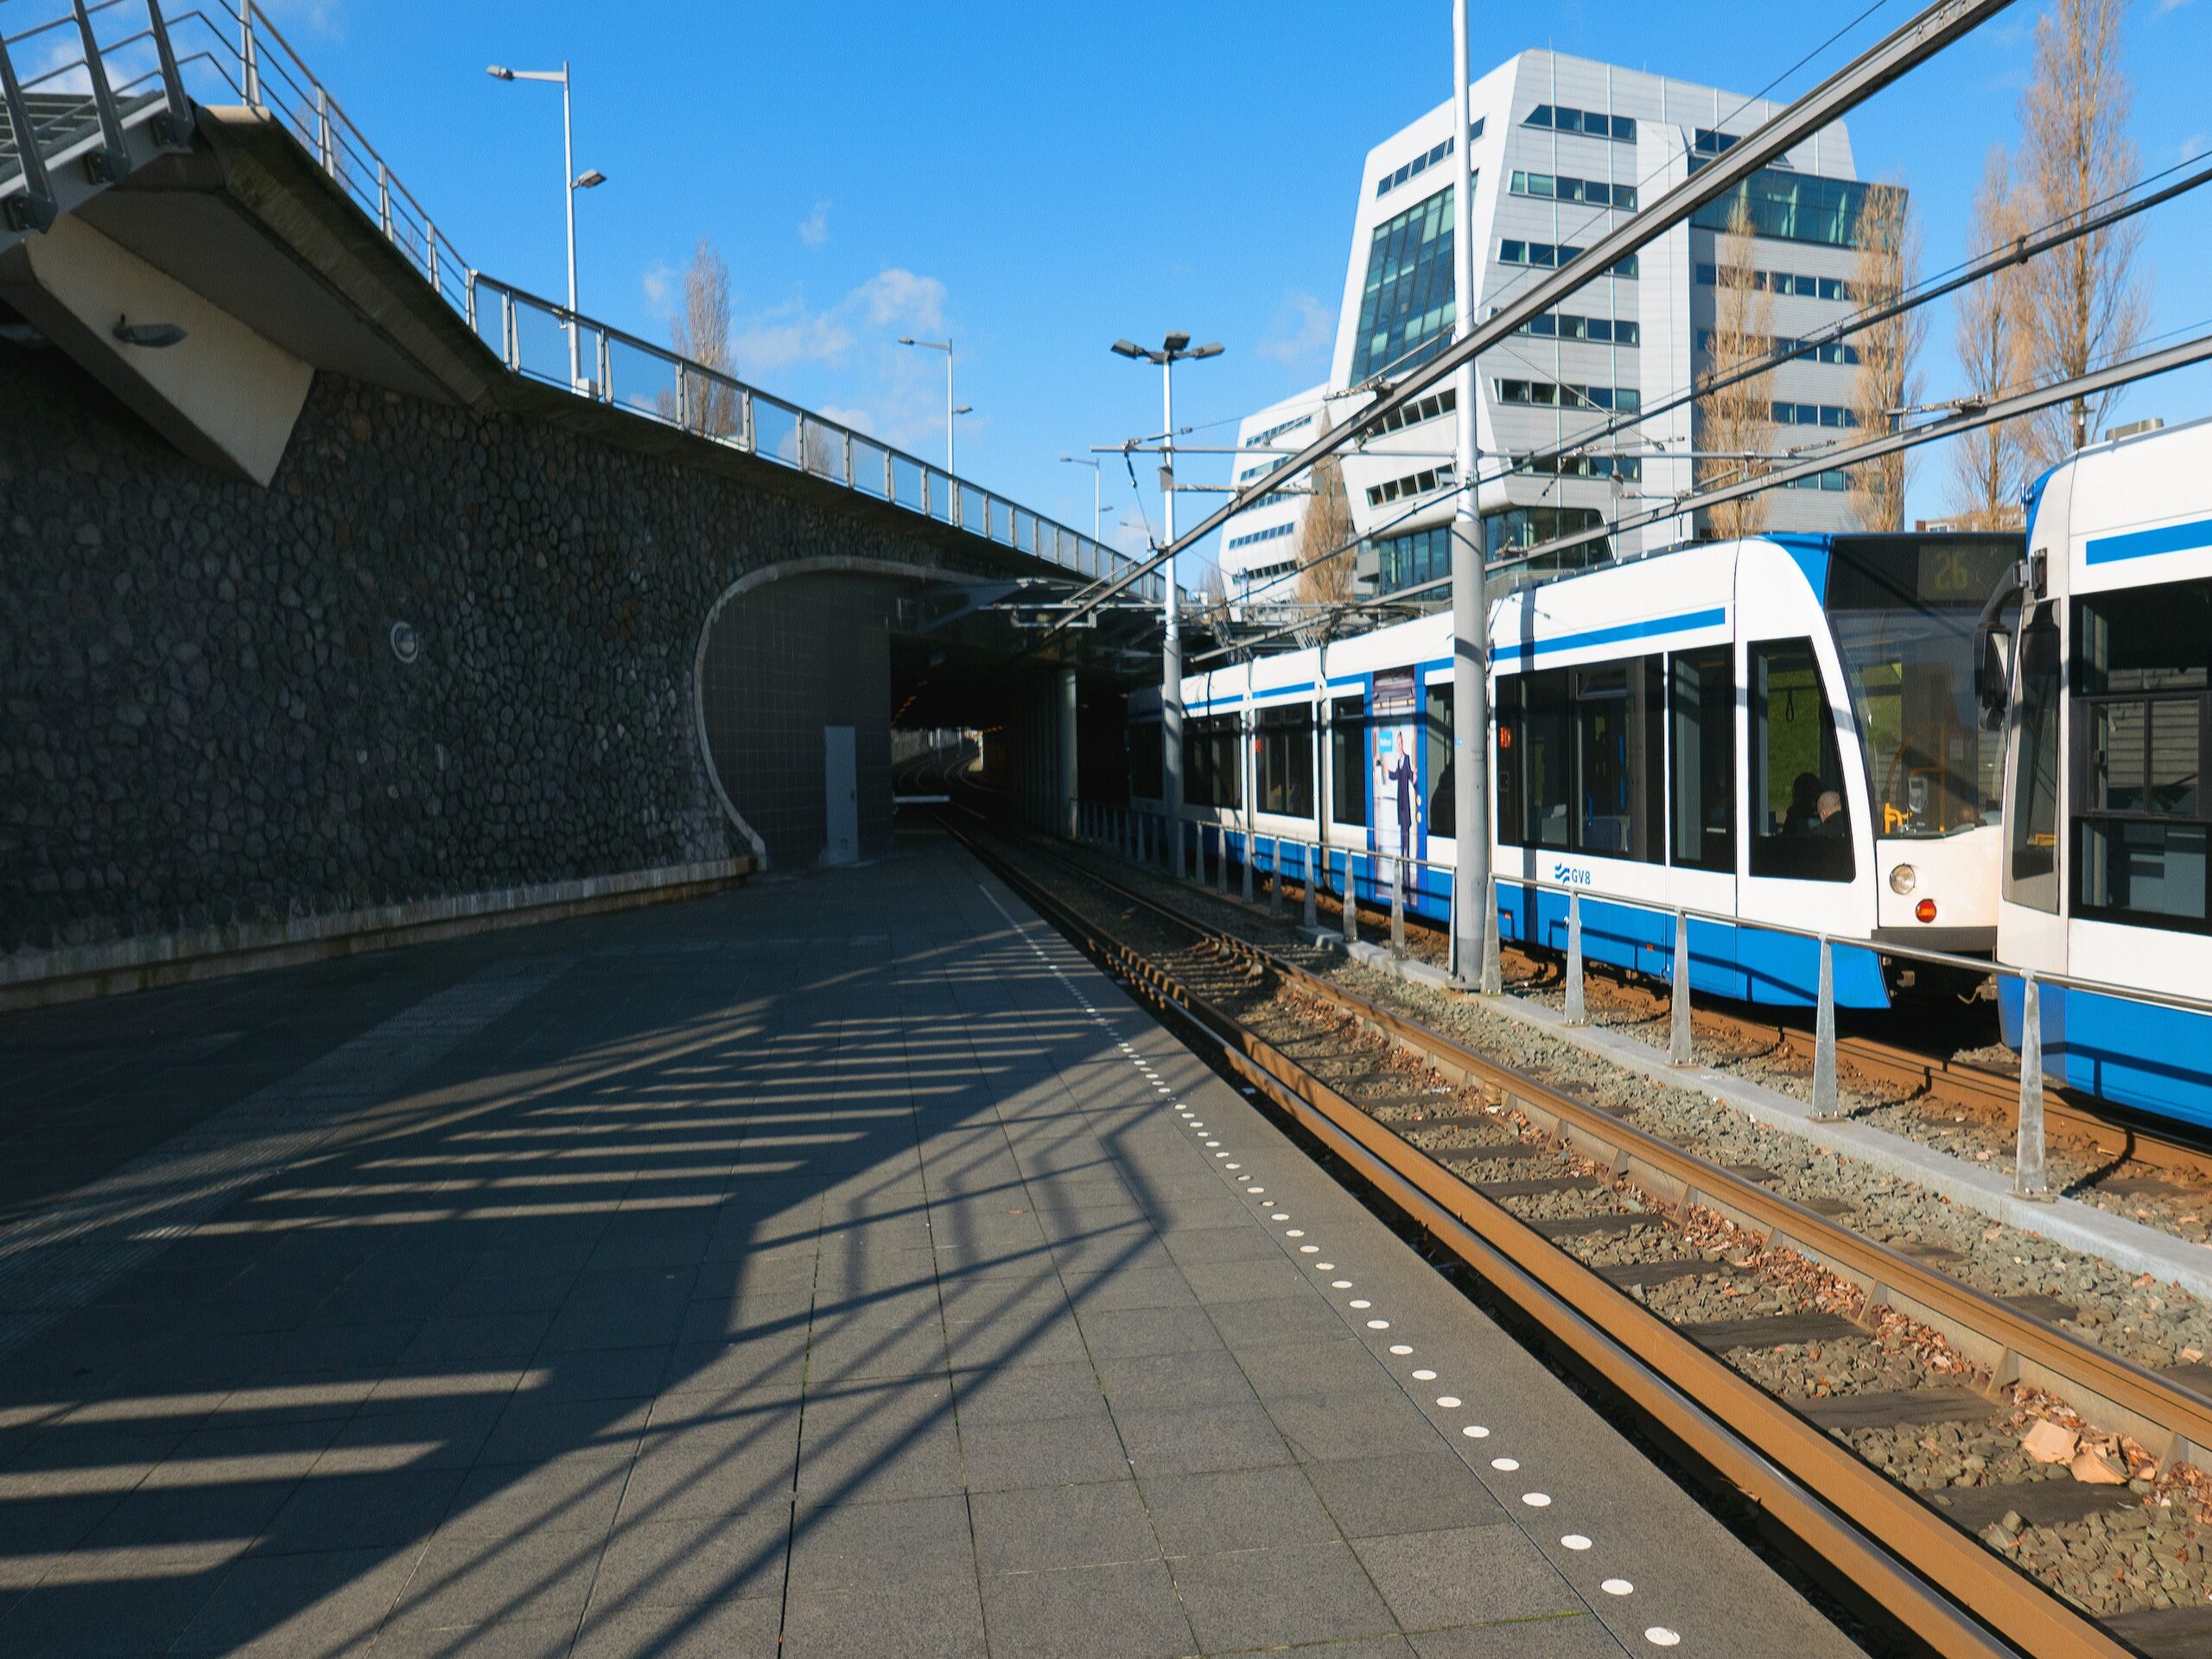 How Do I Handle Transportation In Cities With Extensive Tram Or Light Rail Networks?